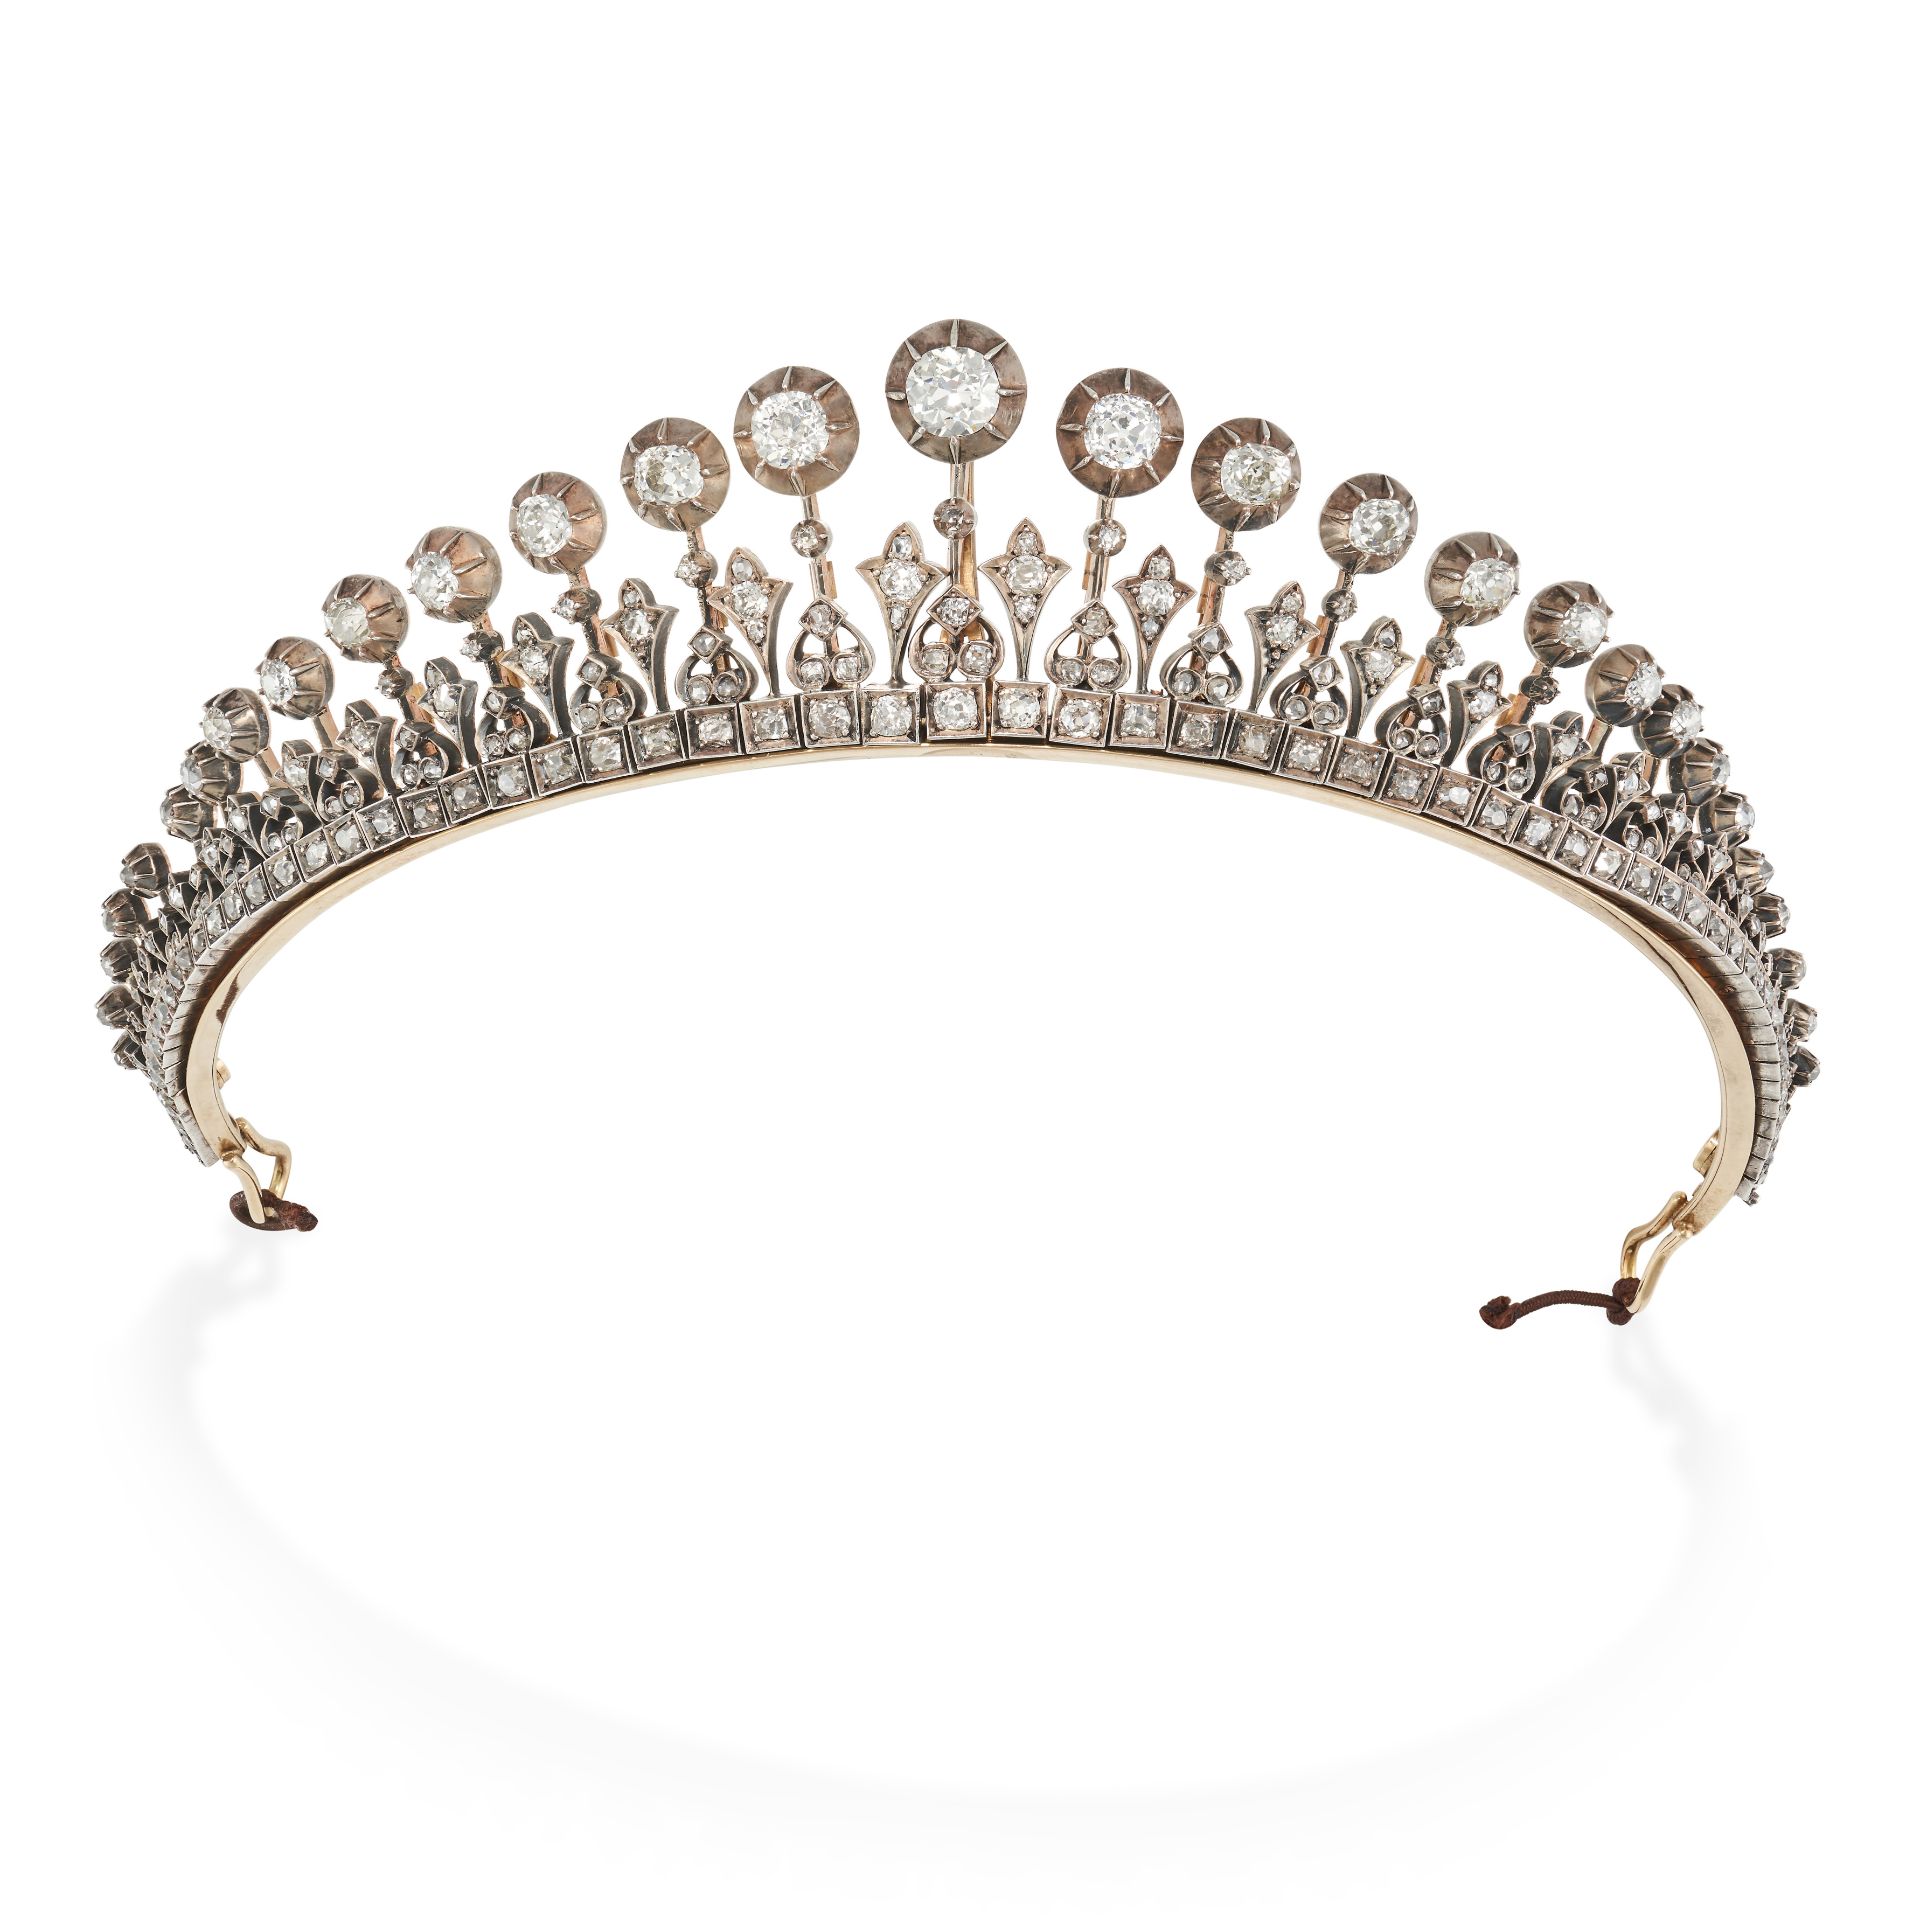 A FINE ANTIQUE VICTORIAN DIAMOND FRINGE TIARA / NECKLACE, 19TH CENTURY in yellow gold and silver,...